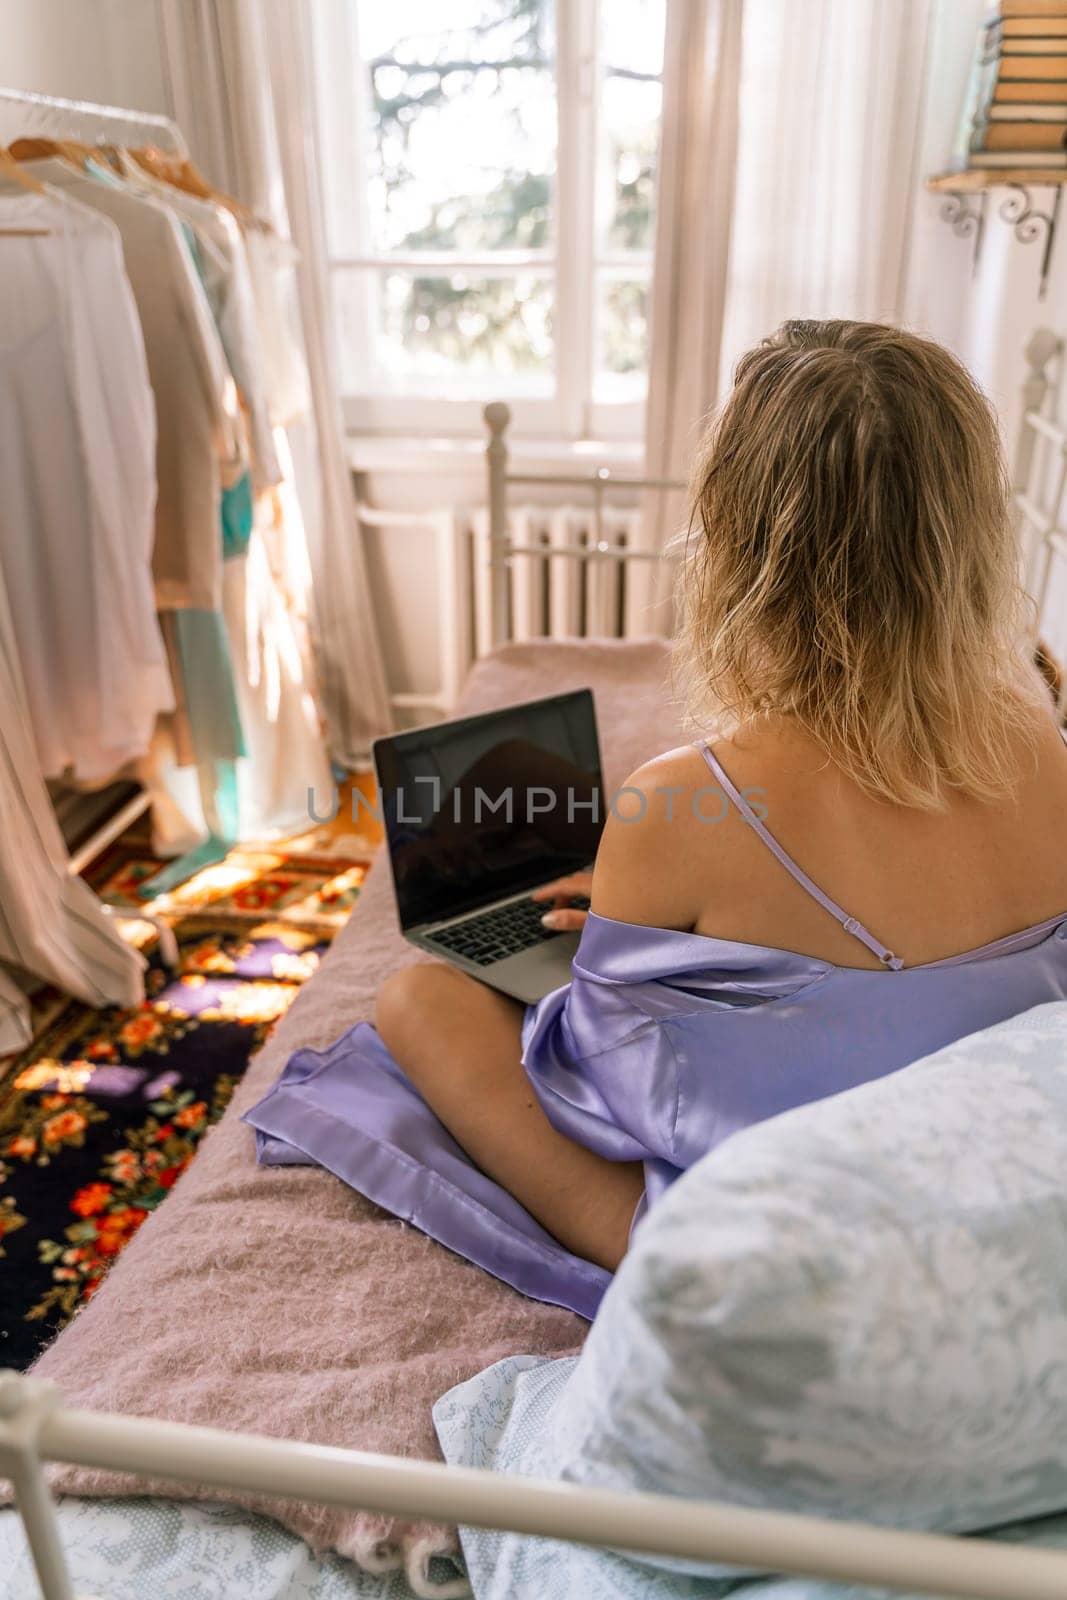 A top view of a woman in a purple nightgown using a laptop on a bed, suggesting that she is working or studying from the comfort of her own home